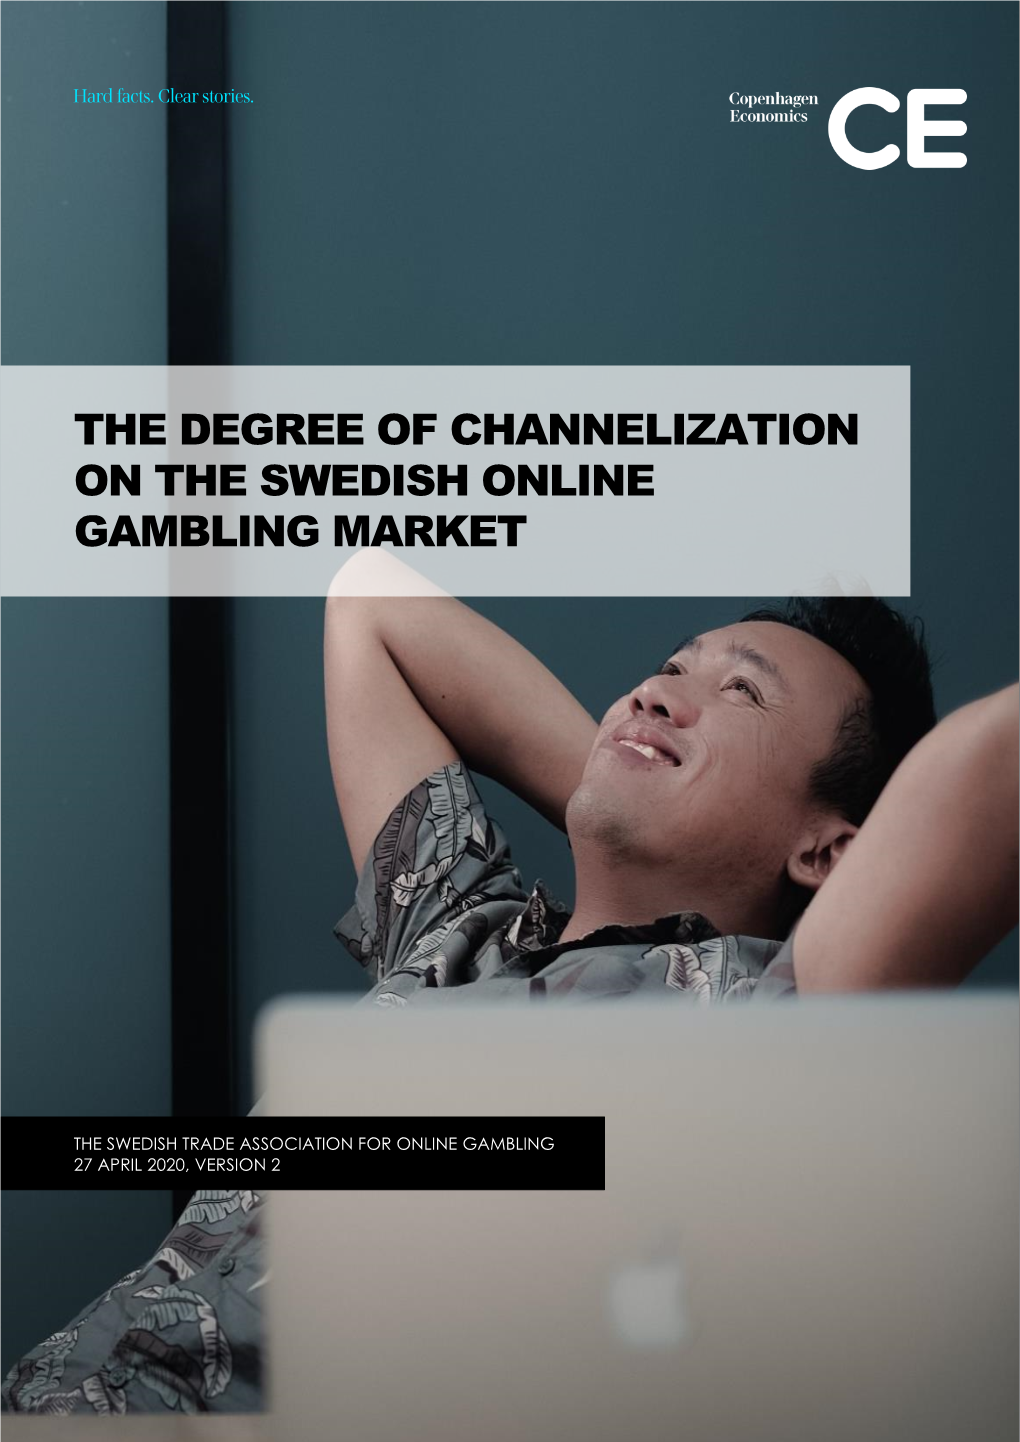 The Degree of Channelization on the Swedish Online Gambling Market